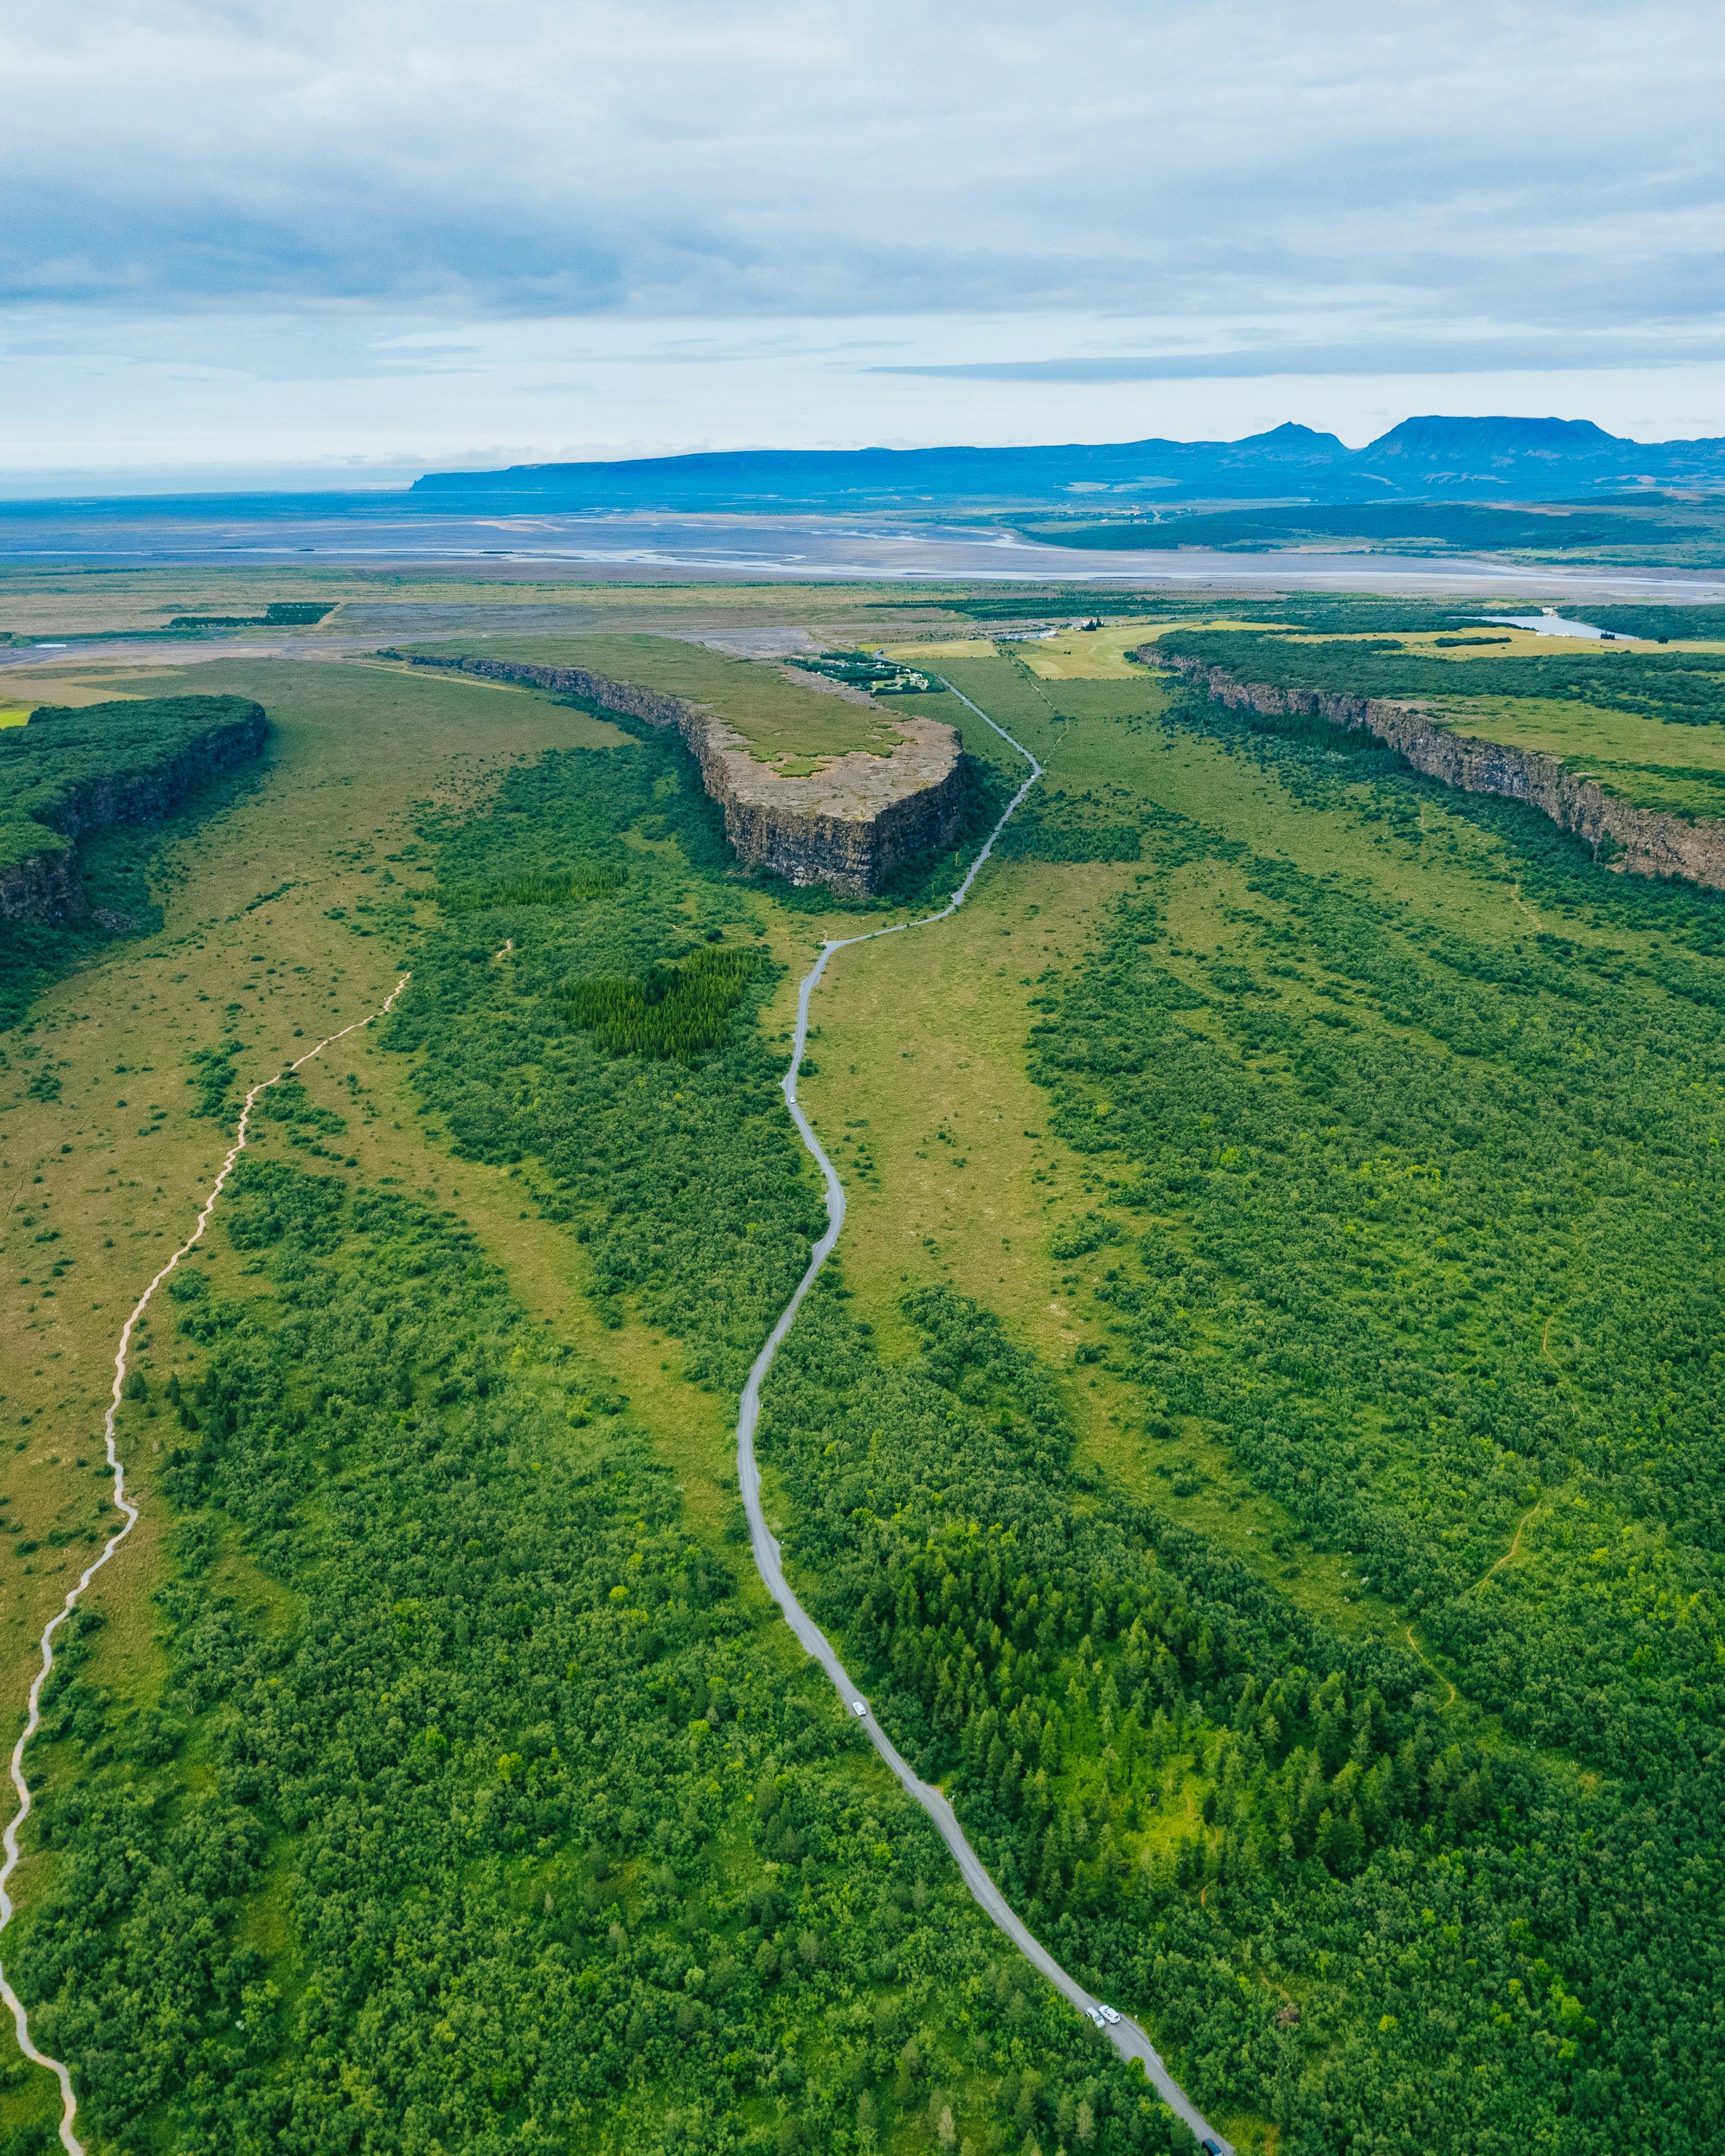 Aerial view of Ásbyrgi Canyon, showing a meandering trail through lush greenery, with a backdrop of distant flat-topped mountains under a cloudy sky.